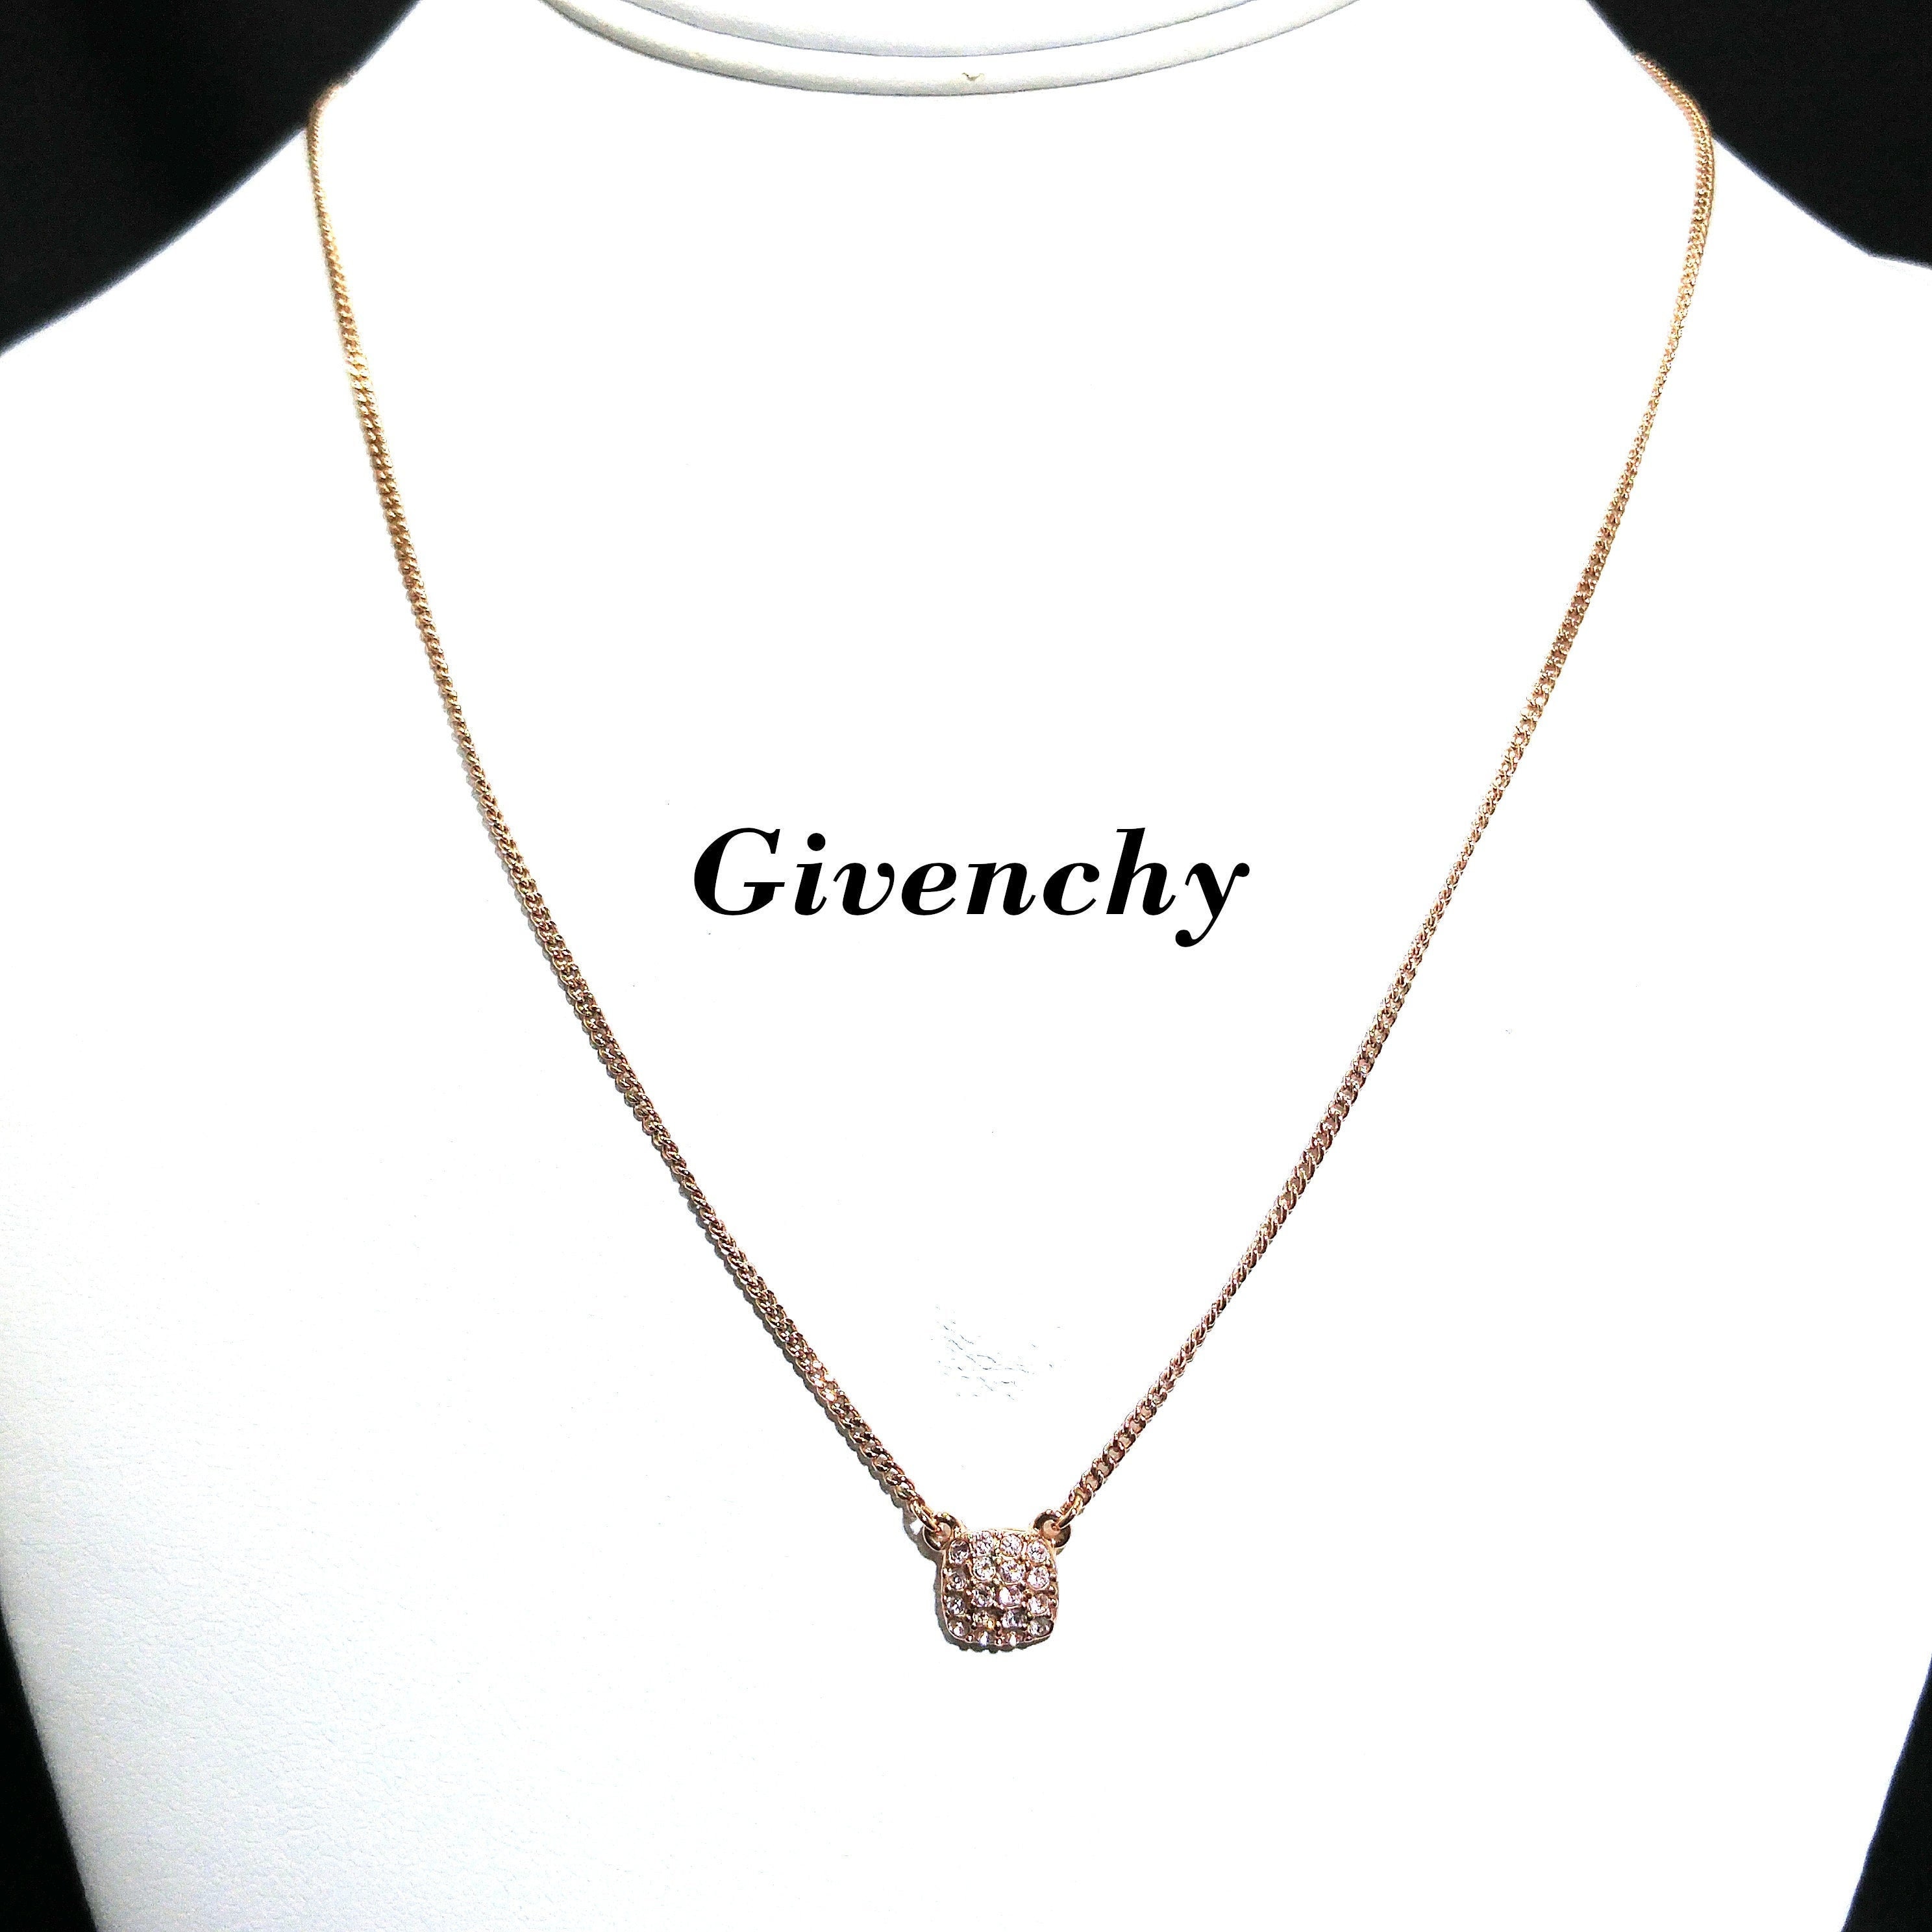 Givenchy Rose Gold Pendant Necklace, Pave Clear Rhinestones, 1990s Vintage  Jewelry - Etsy Hong Kong